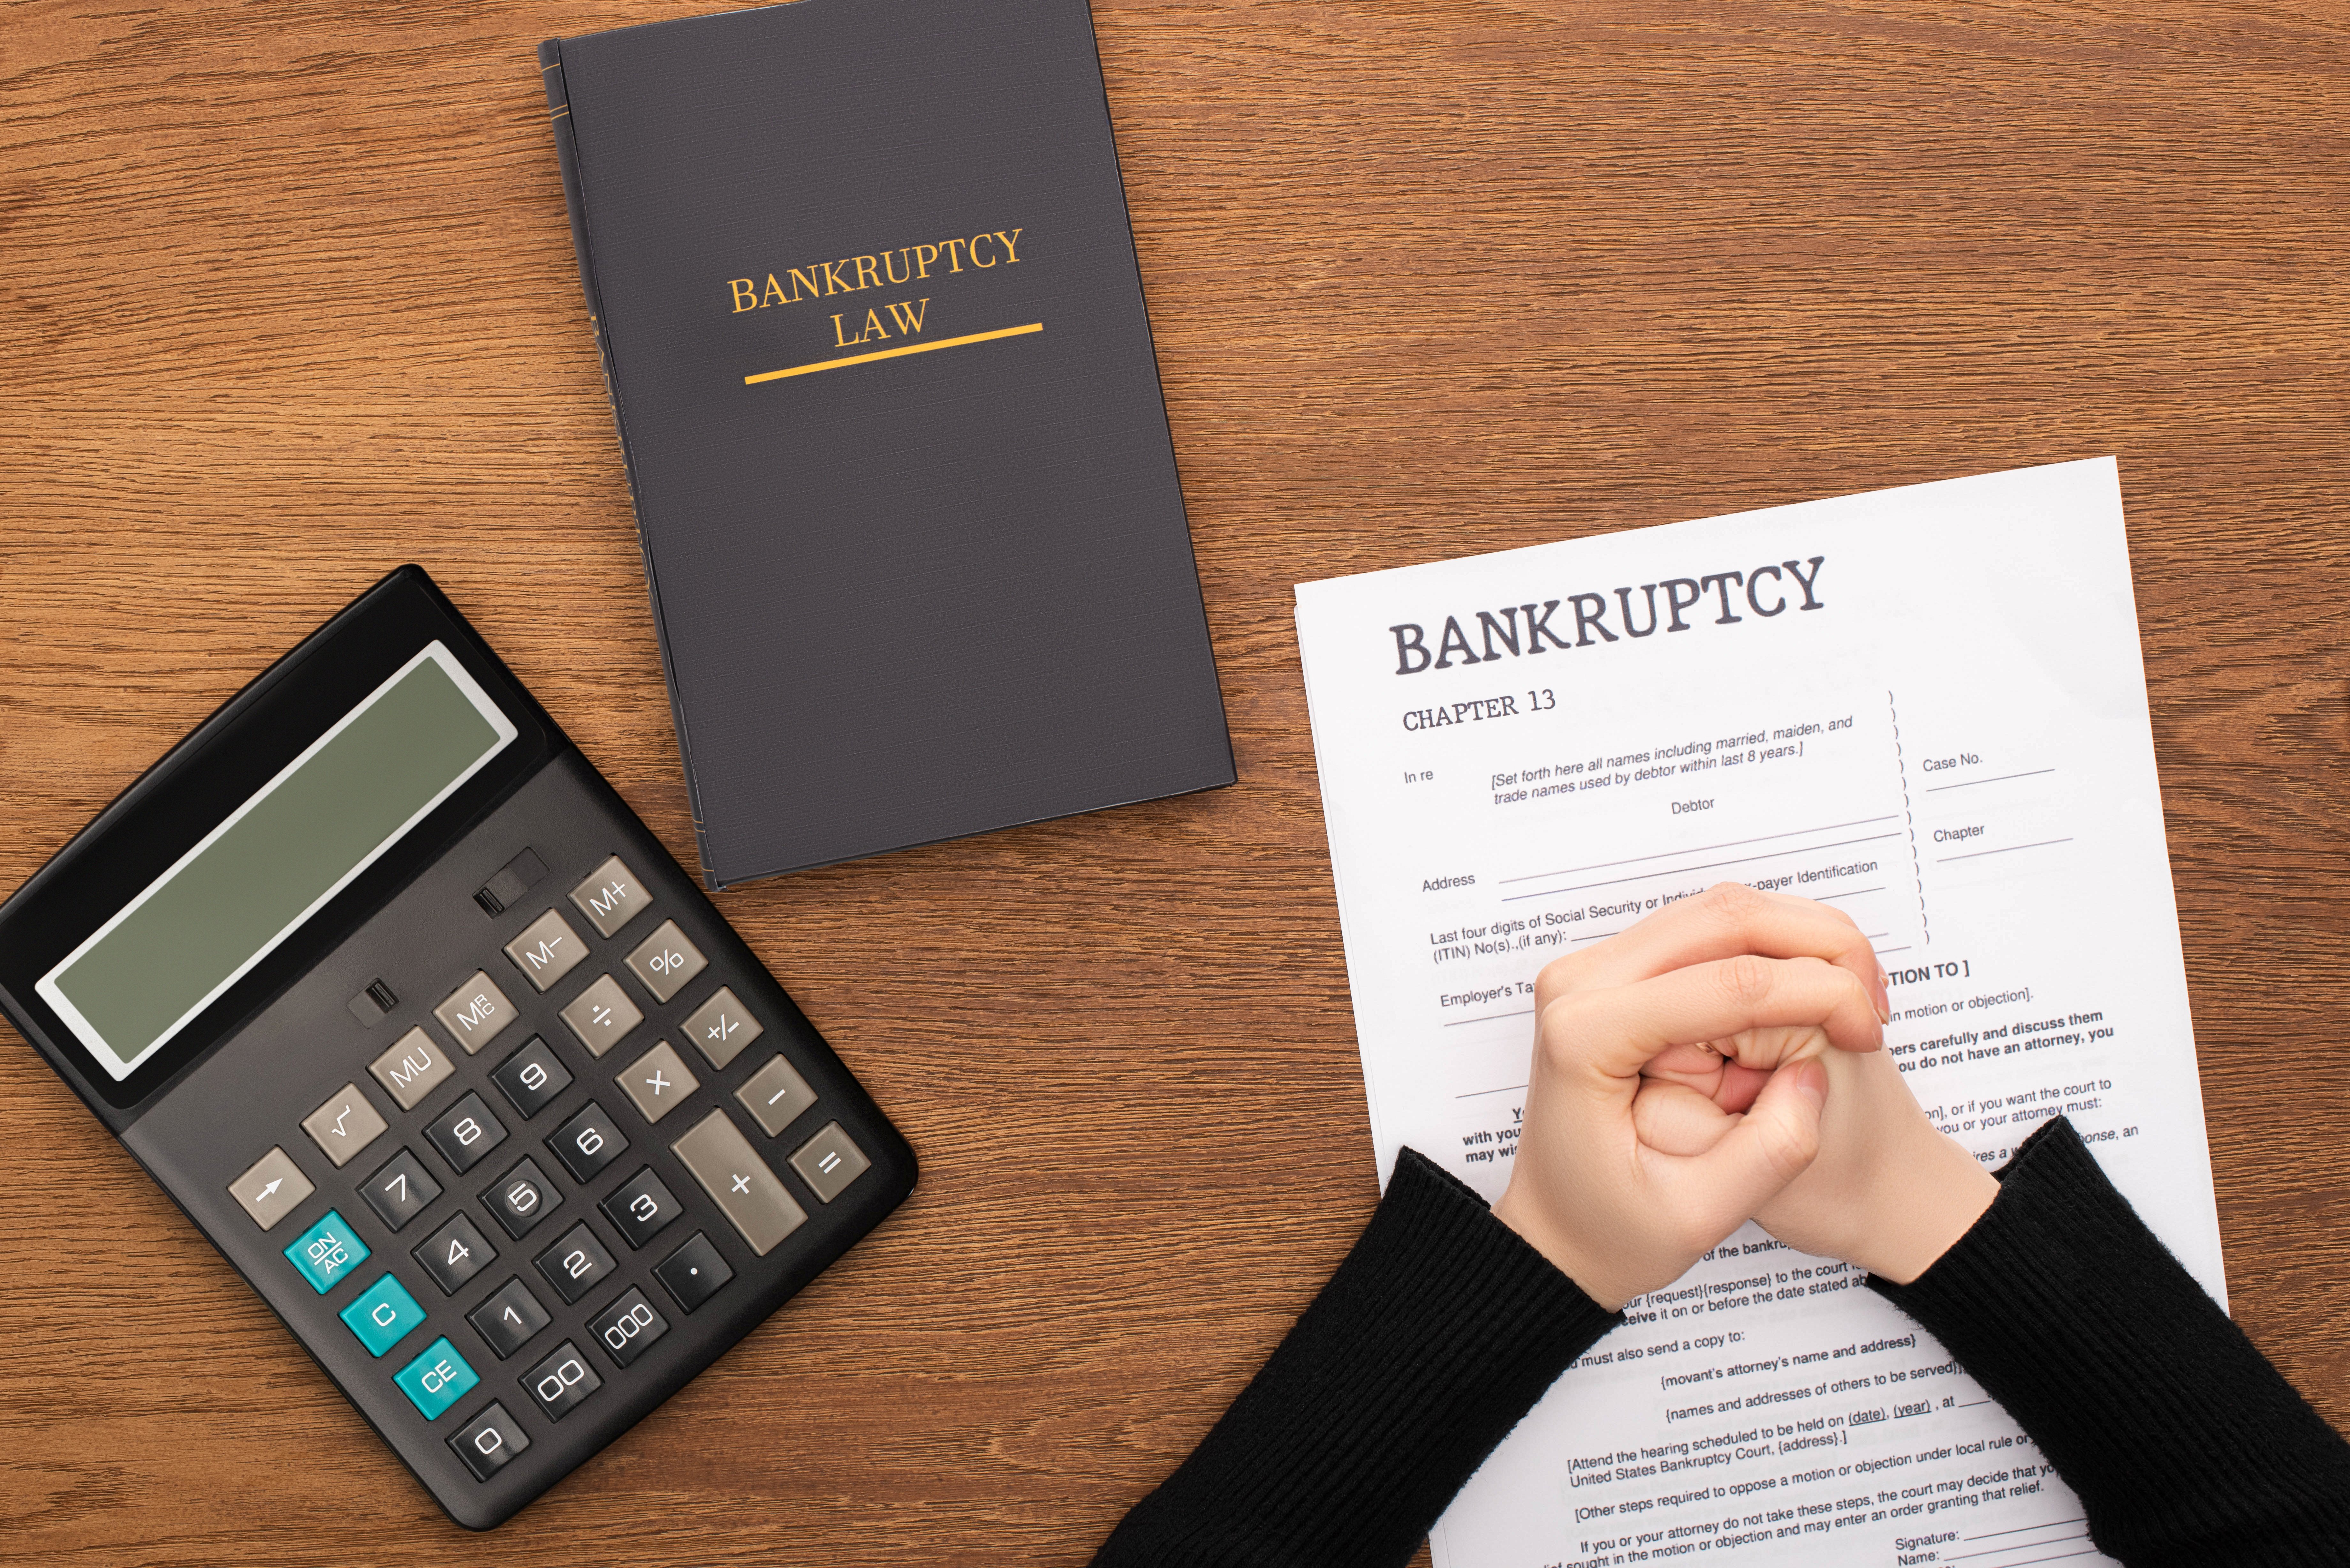 Life after Bankruptcy: How to Repair Your Credit